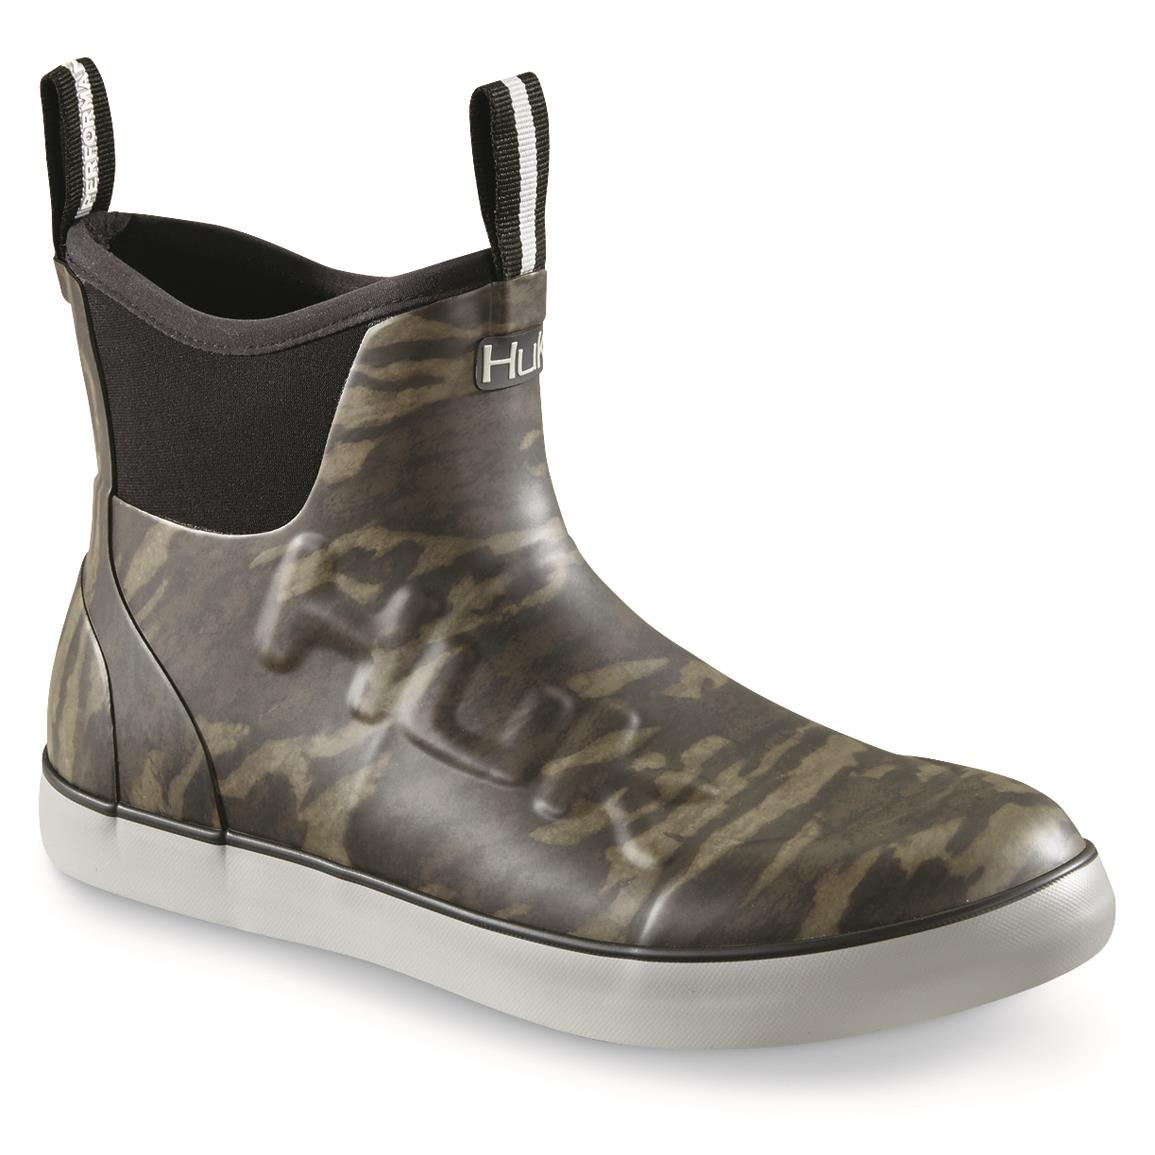 huk boat boots